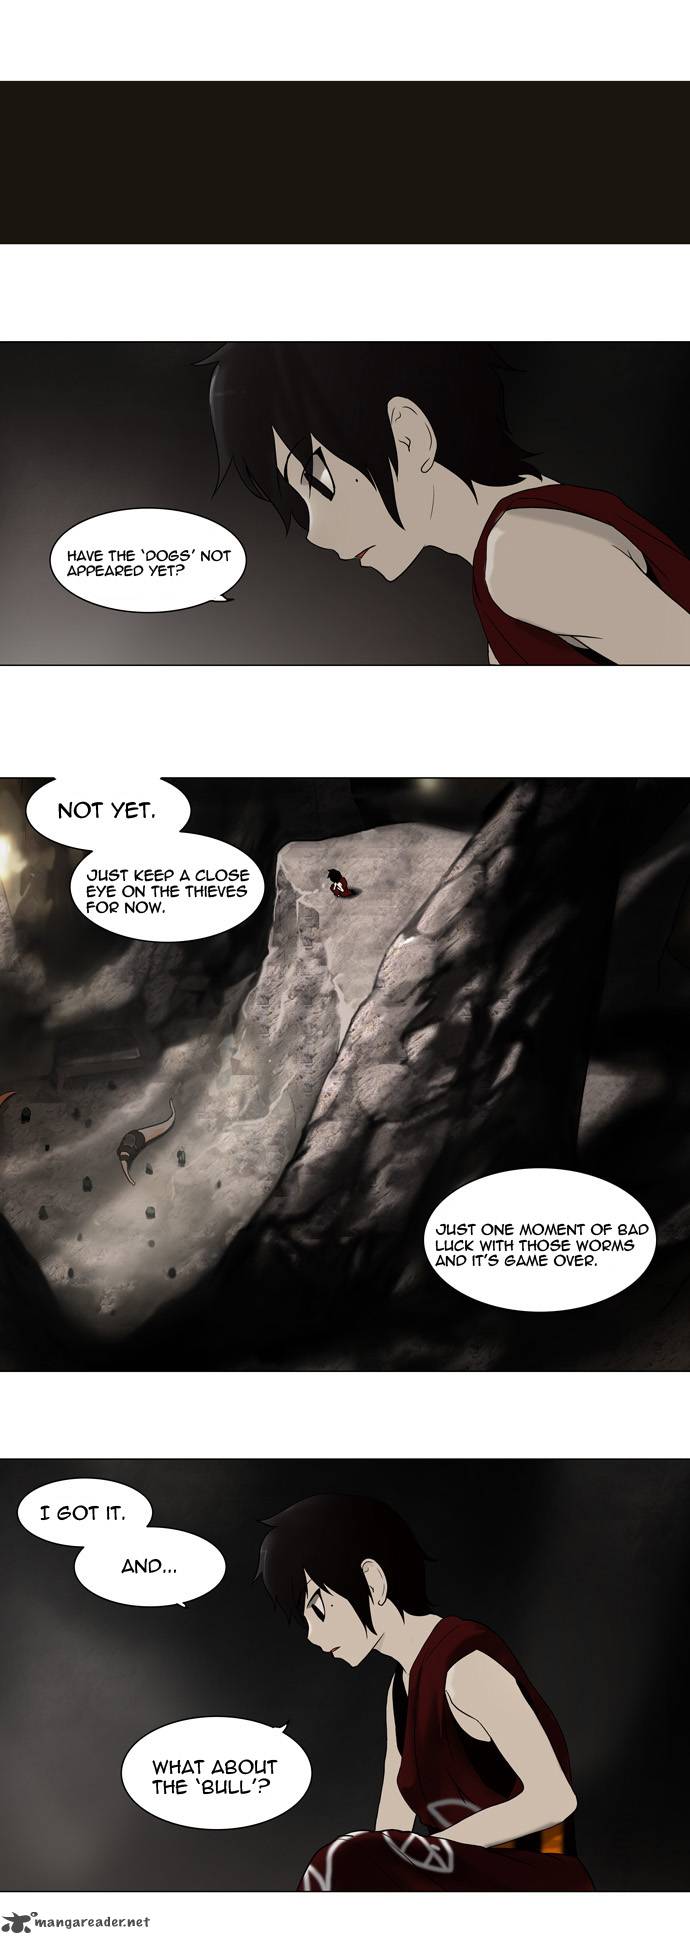 Tower Of God 60 25